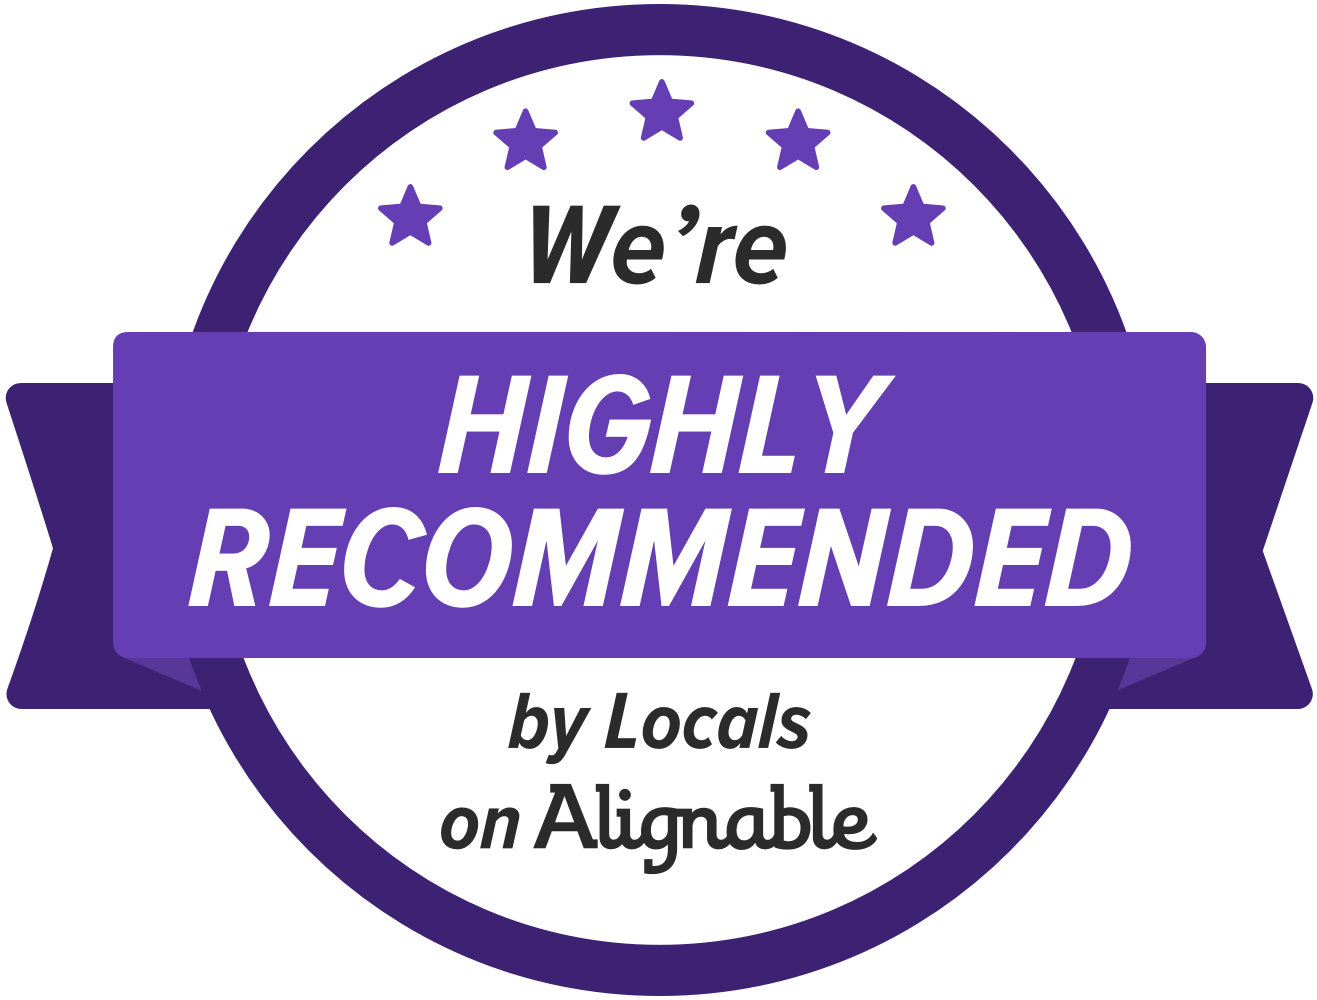 We're highly recommended!